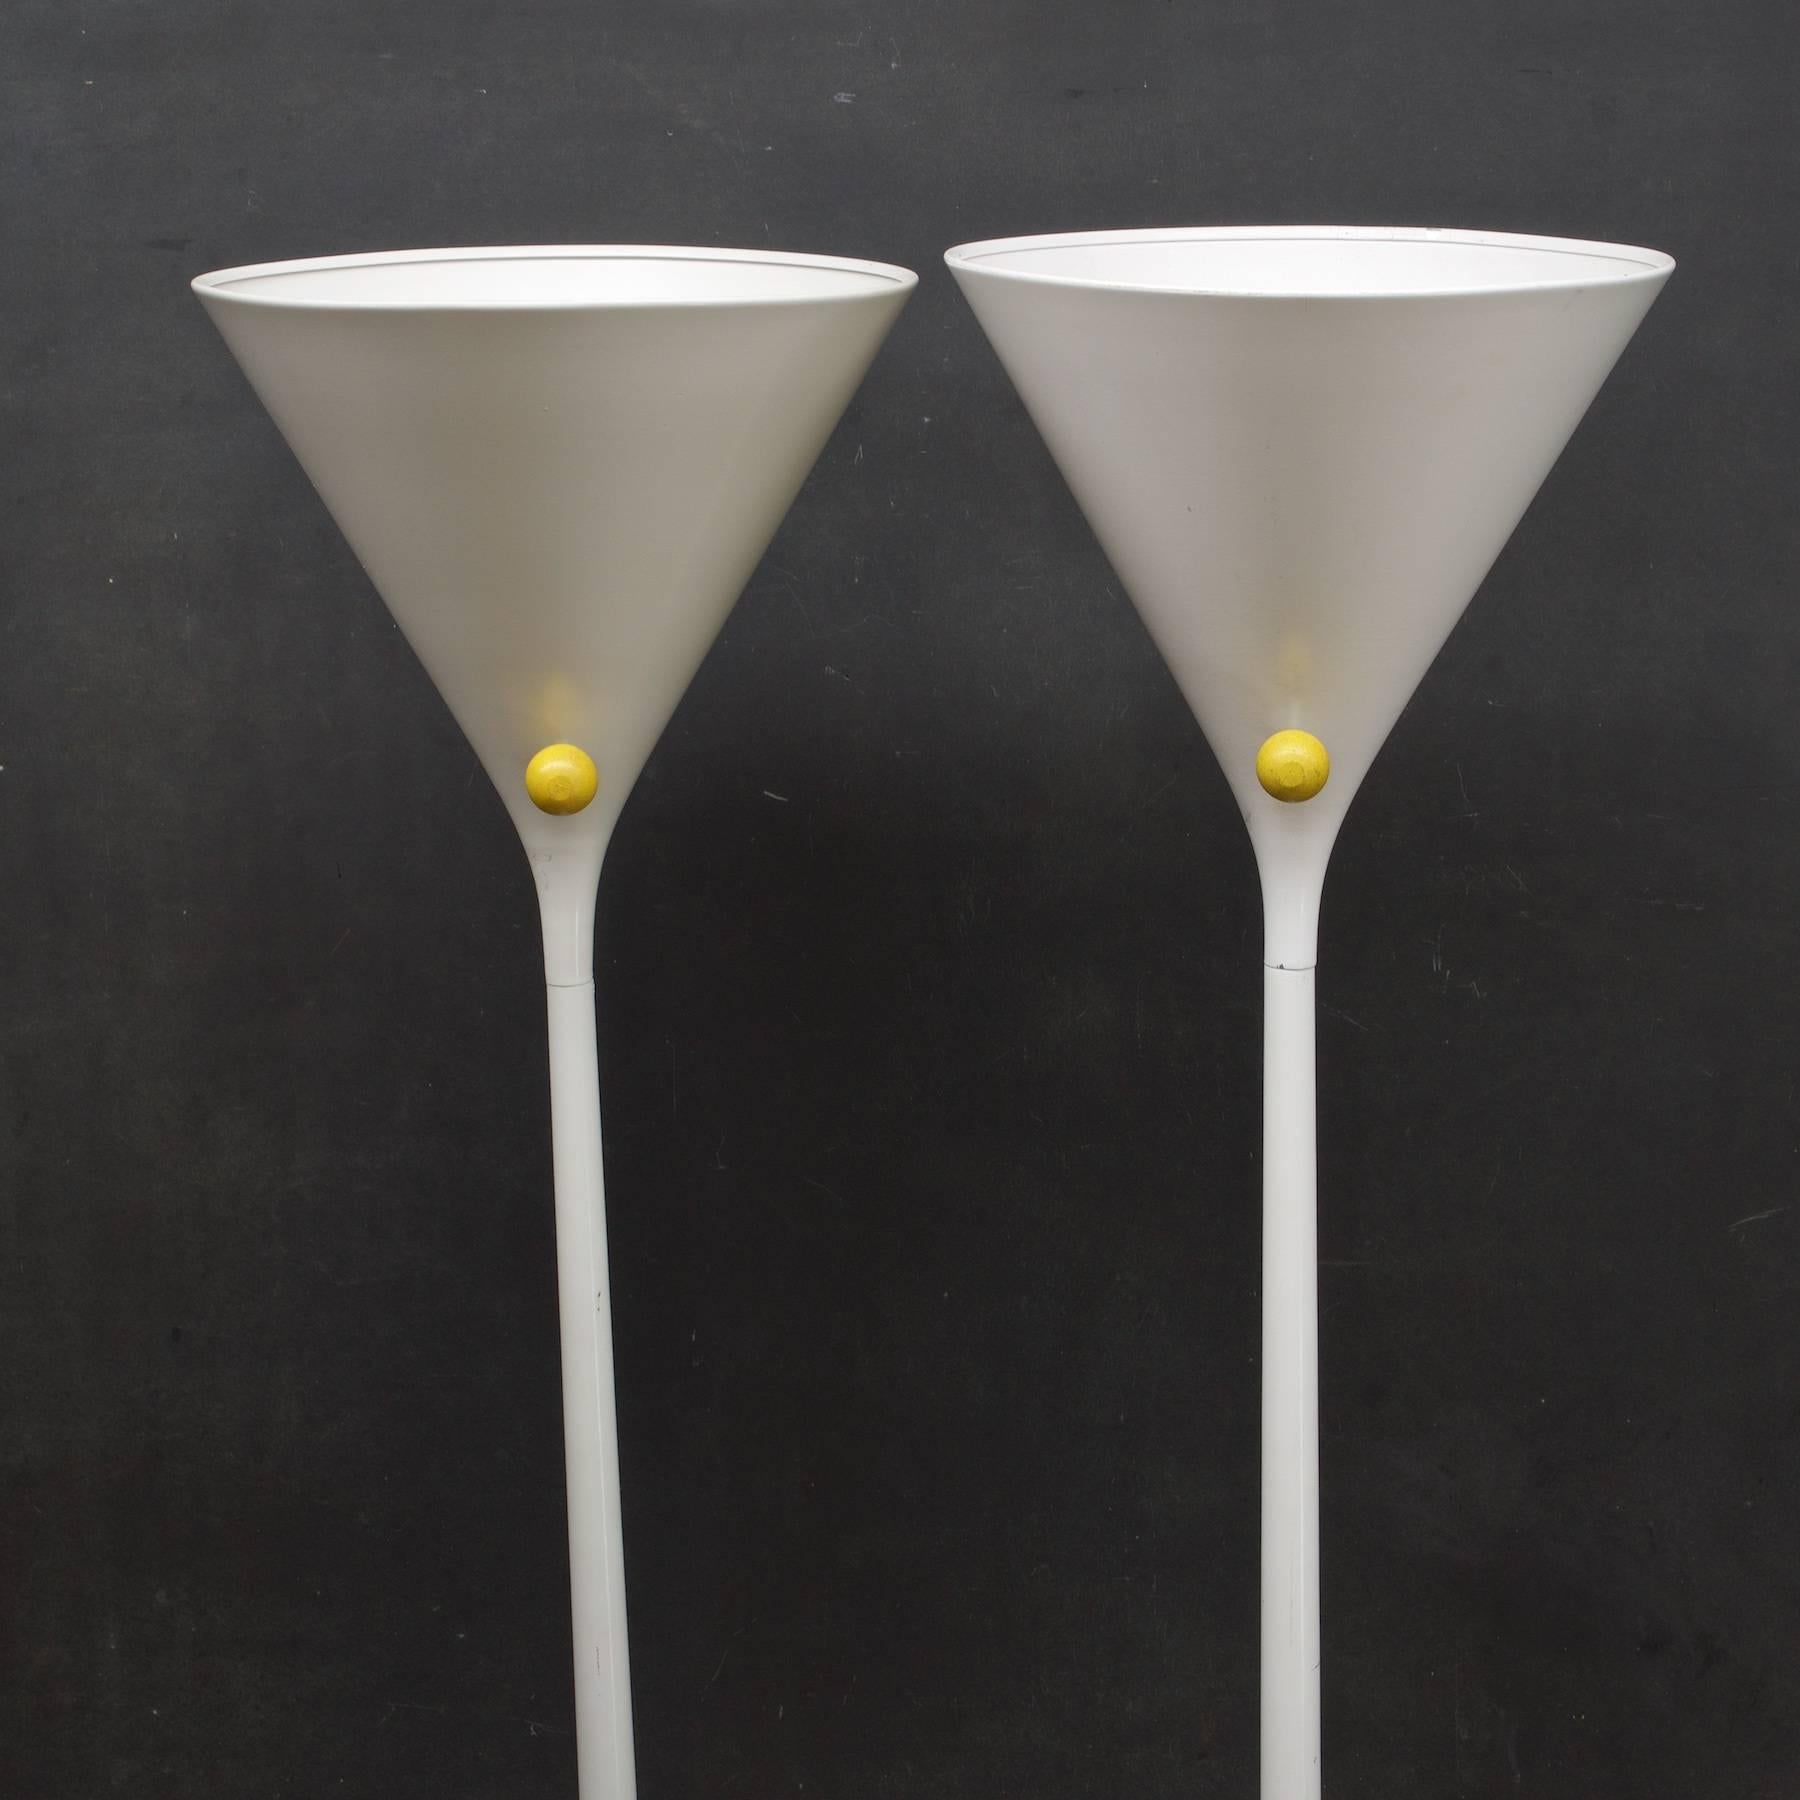 Great pair of matching conical floor lamps, old Hollywood style, with yellow clown nose switches, one retains the original label on base.) Sold in a set of two.  Tops of Bases are show some wear.